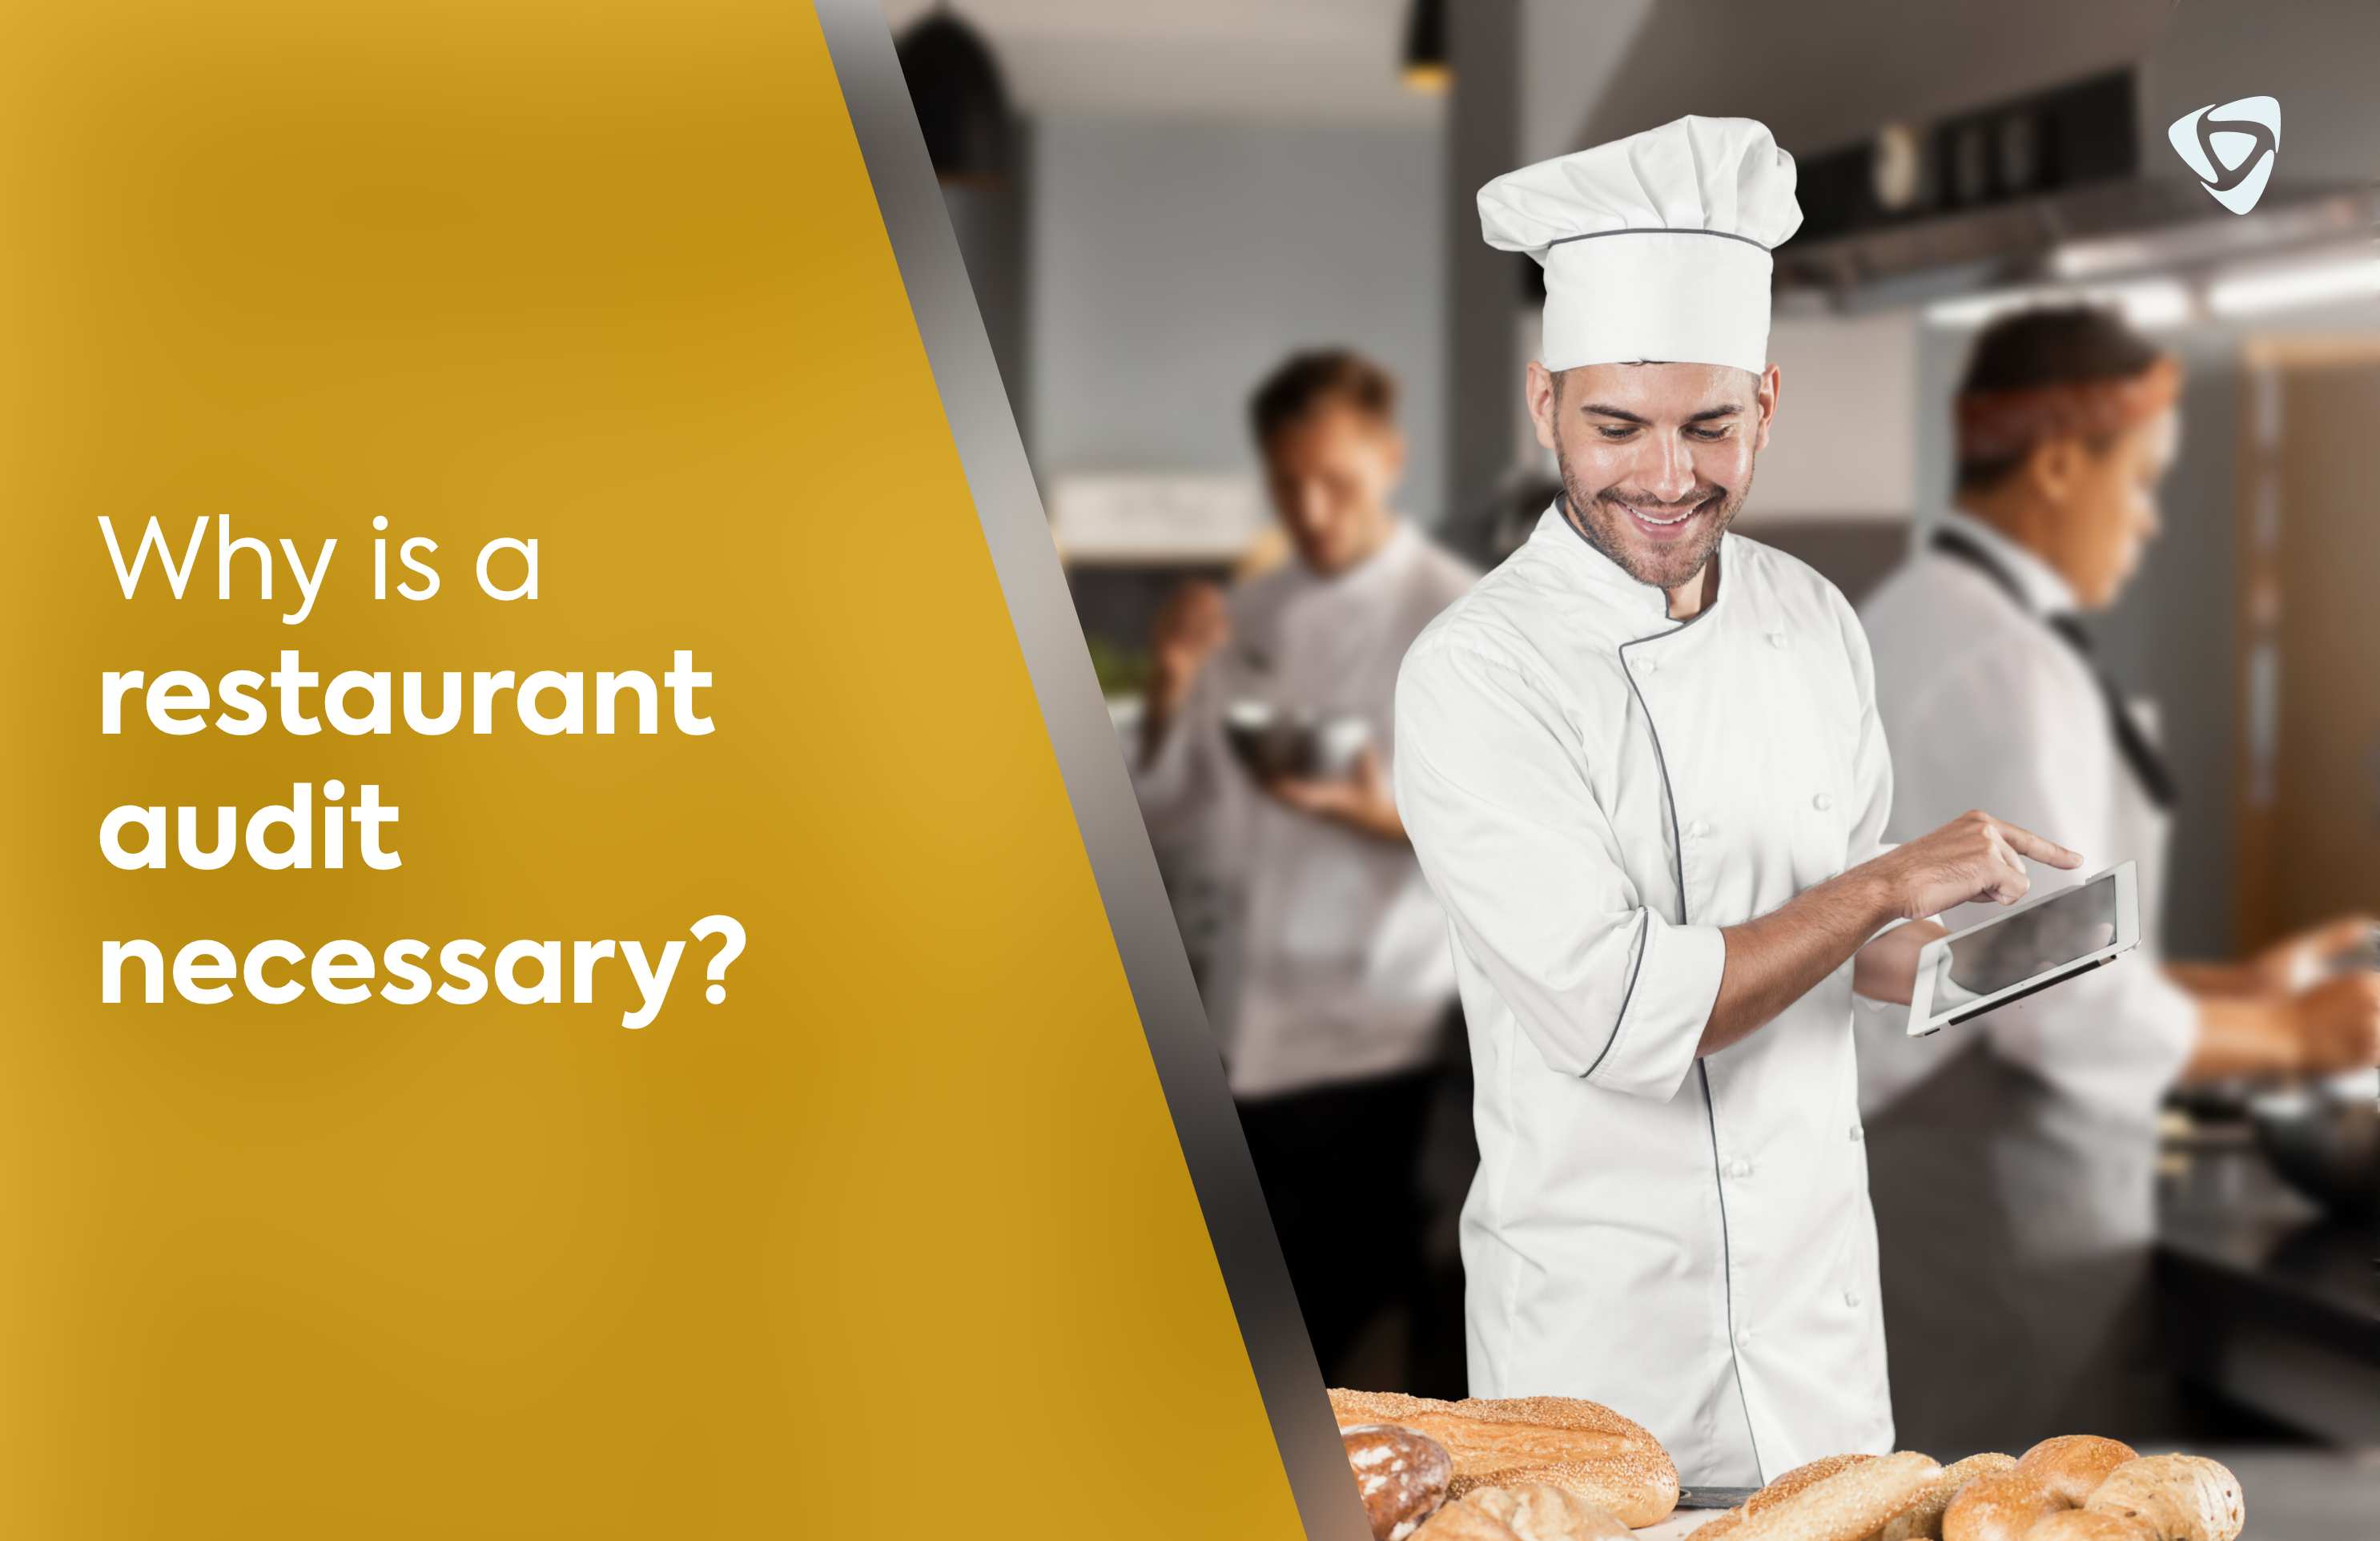 Why is a restaurant audit necessary